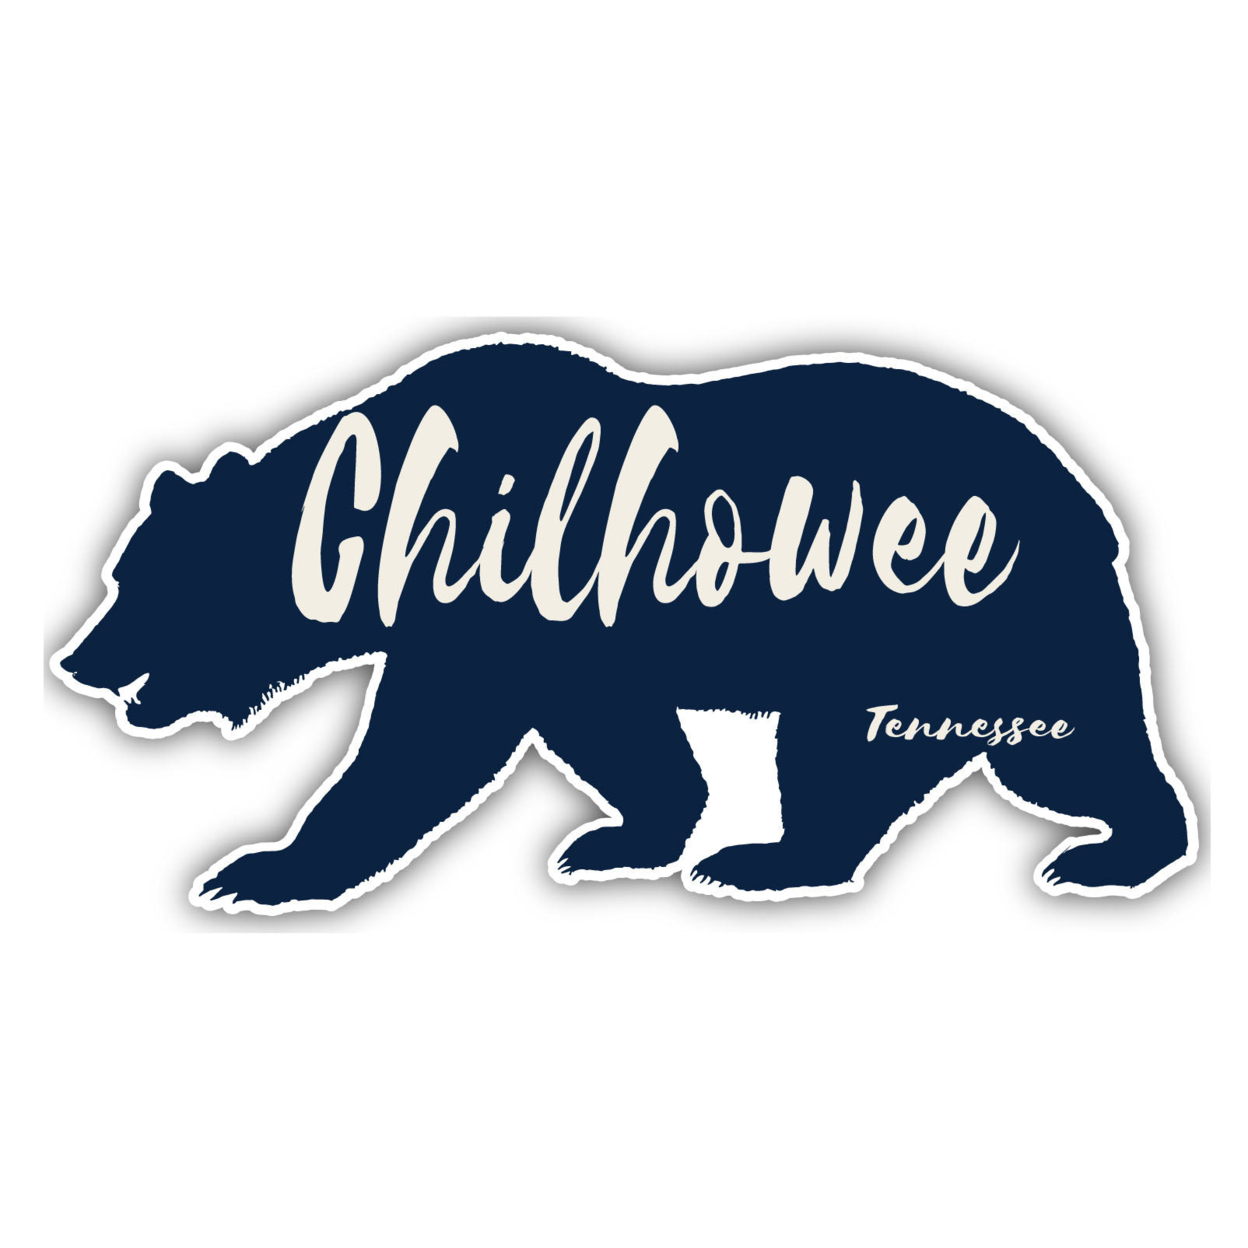 Chilhowee Tennessee Souvenir Decorative Stickers (Choose Theme And Size) - 4-Pack, 8-Inch, Bear